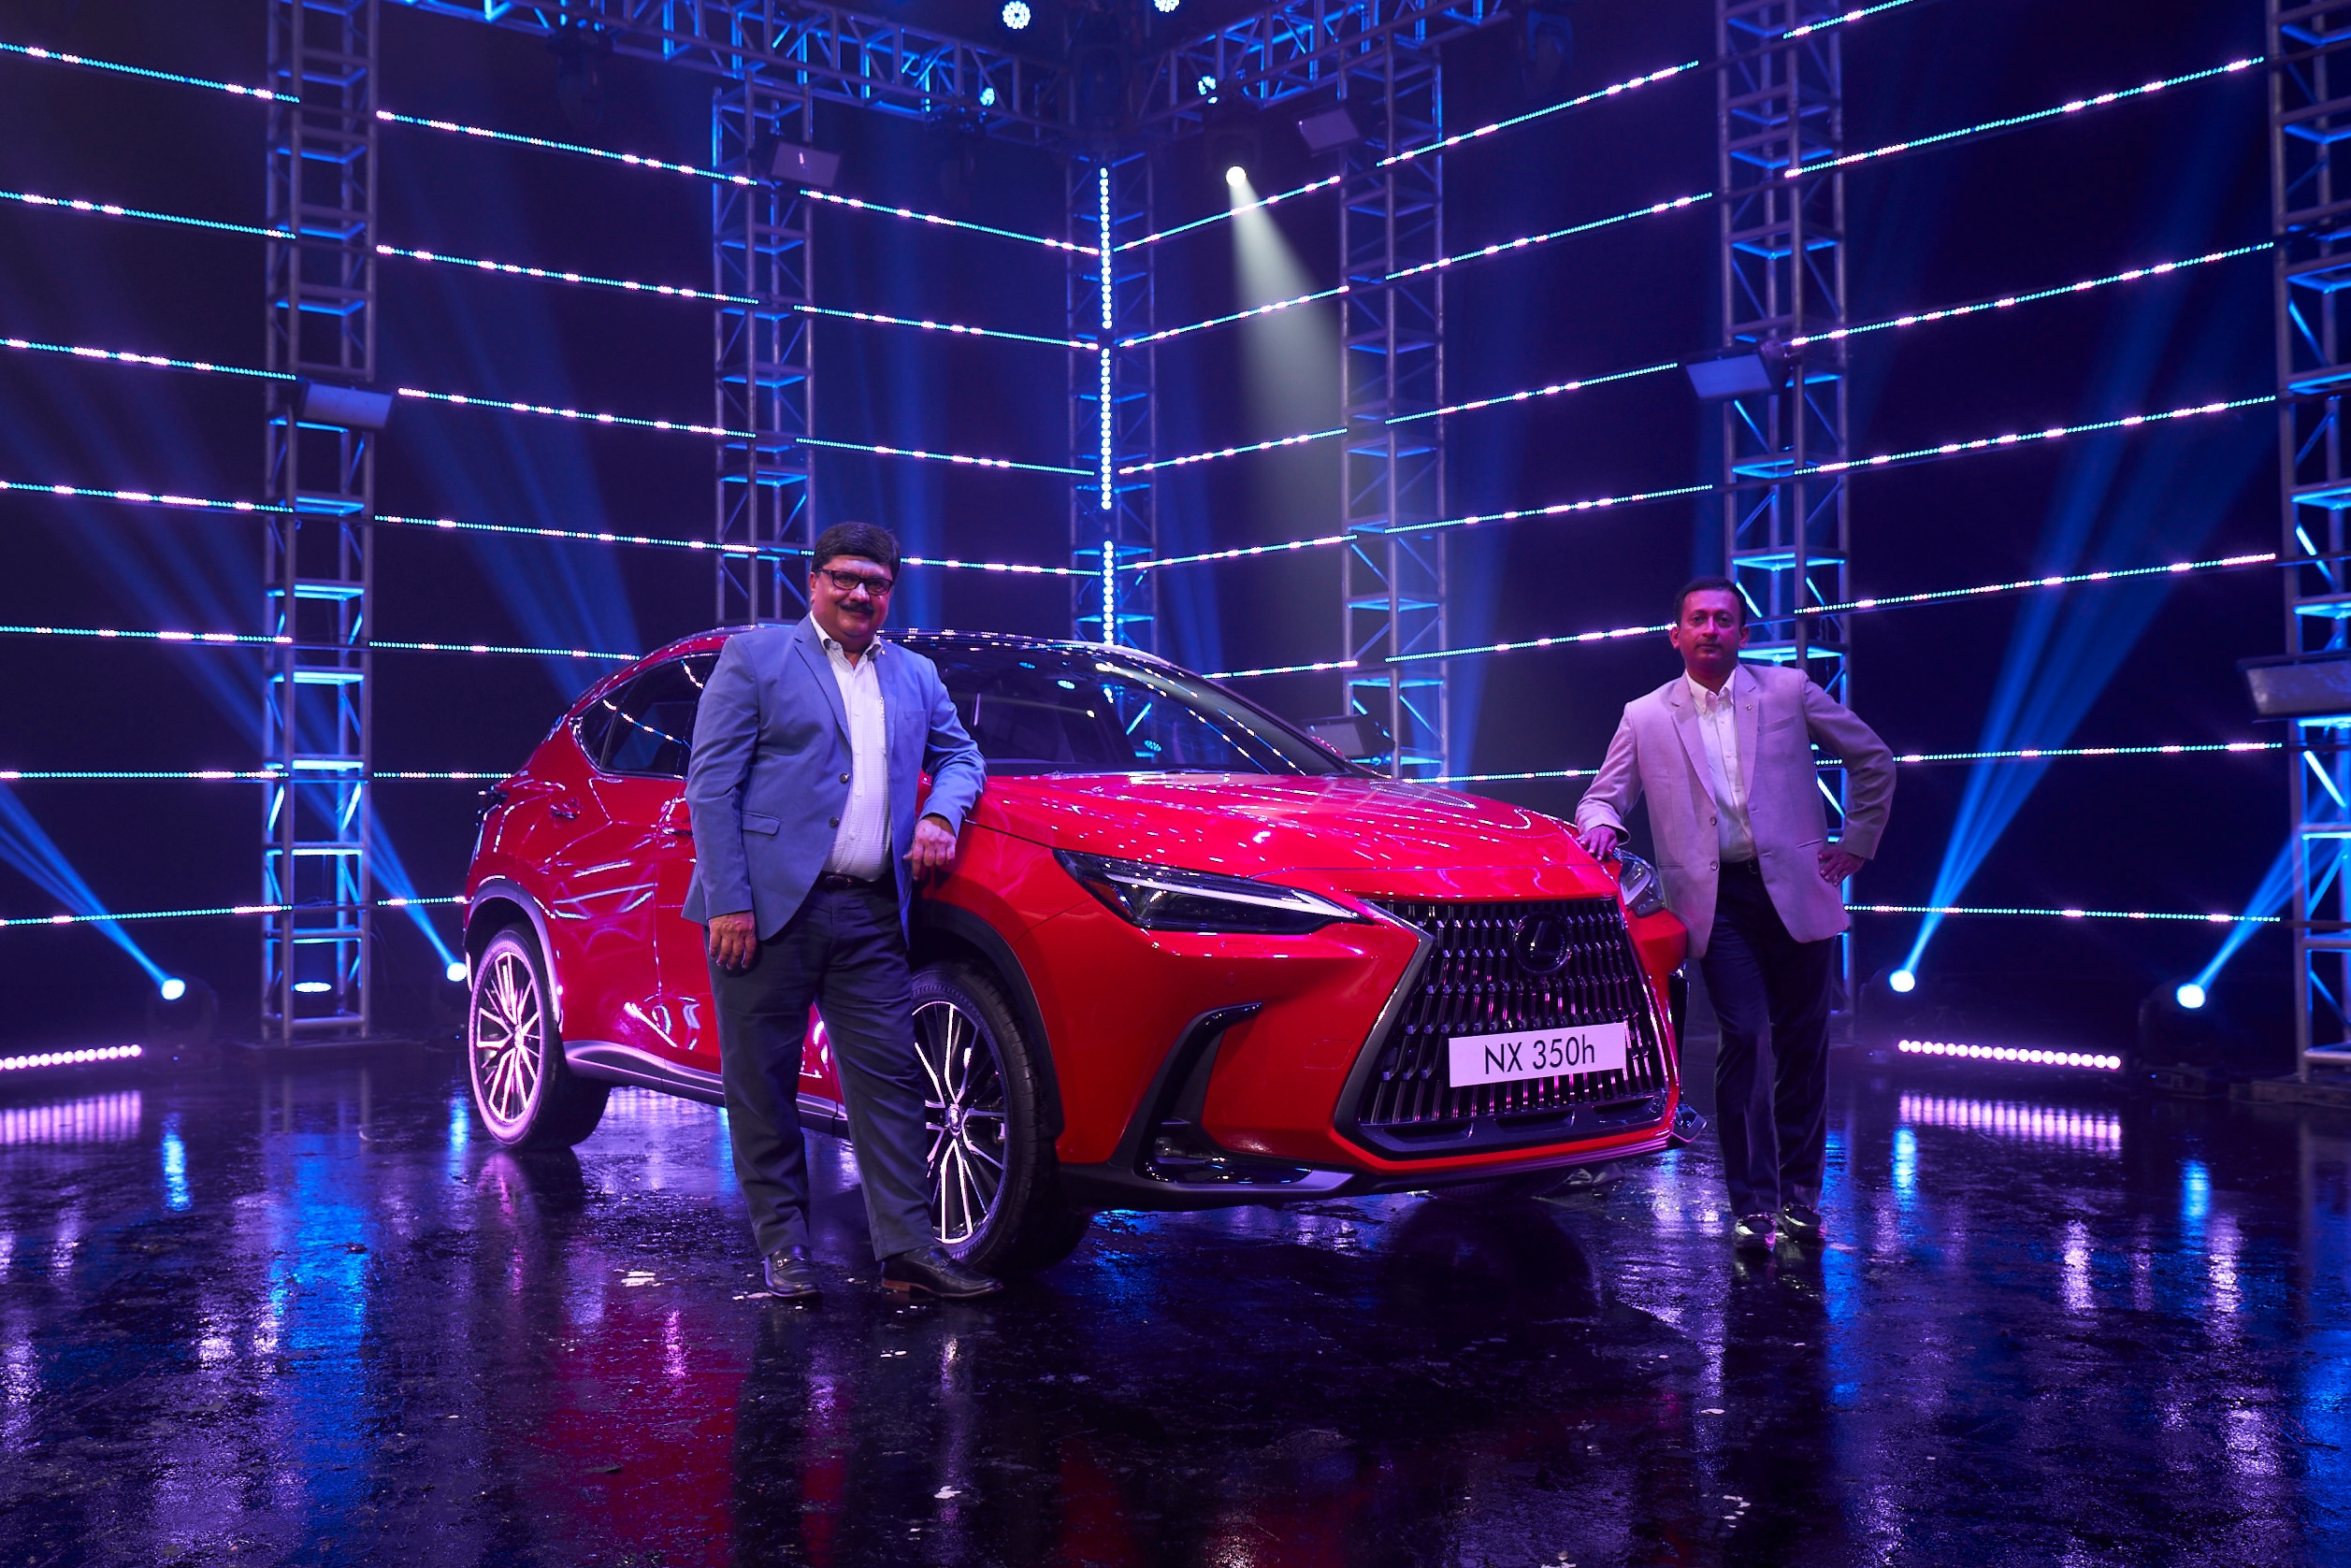 Naveen Soni (L), President, and Maharaj Mukherjee, Executive Vice President at Lexus India with the updated NX 350h.